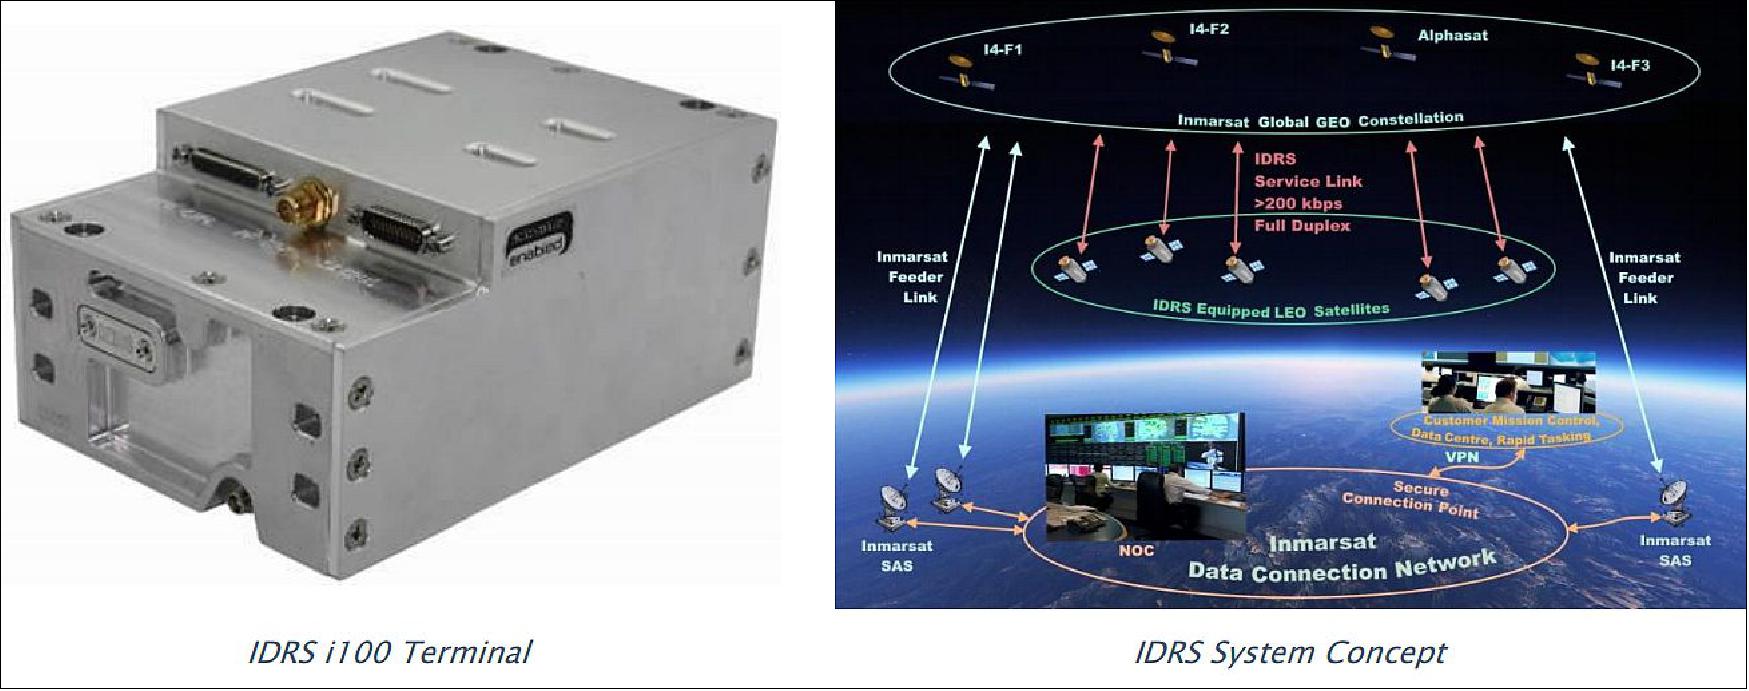 Figure 13: IDRS, the small and compact communications system developed by Addvalue Innovation, enables the communication at L-band with the Inmarsat global constellation of GEO satellites. This system enables applications and missions with real-time tasking and real-time data delivery corresponding with any impromptu events. The IDRS terminal employs either a directional antenna that is assisted by the LEO satellite, or an autonomous switched antenna, and tracks the visible GEO satellite in order to automatically establish a continuous connection, with sustainable data rates of 200 kbit/s (image credit: EO-Alert Consortium)